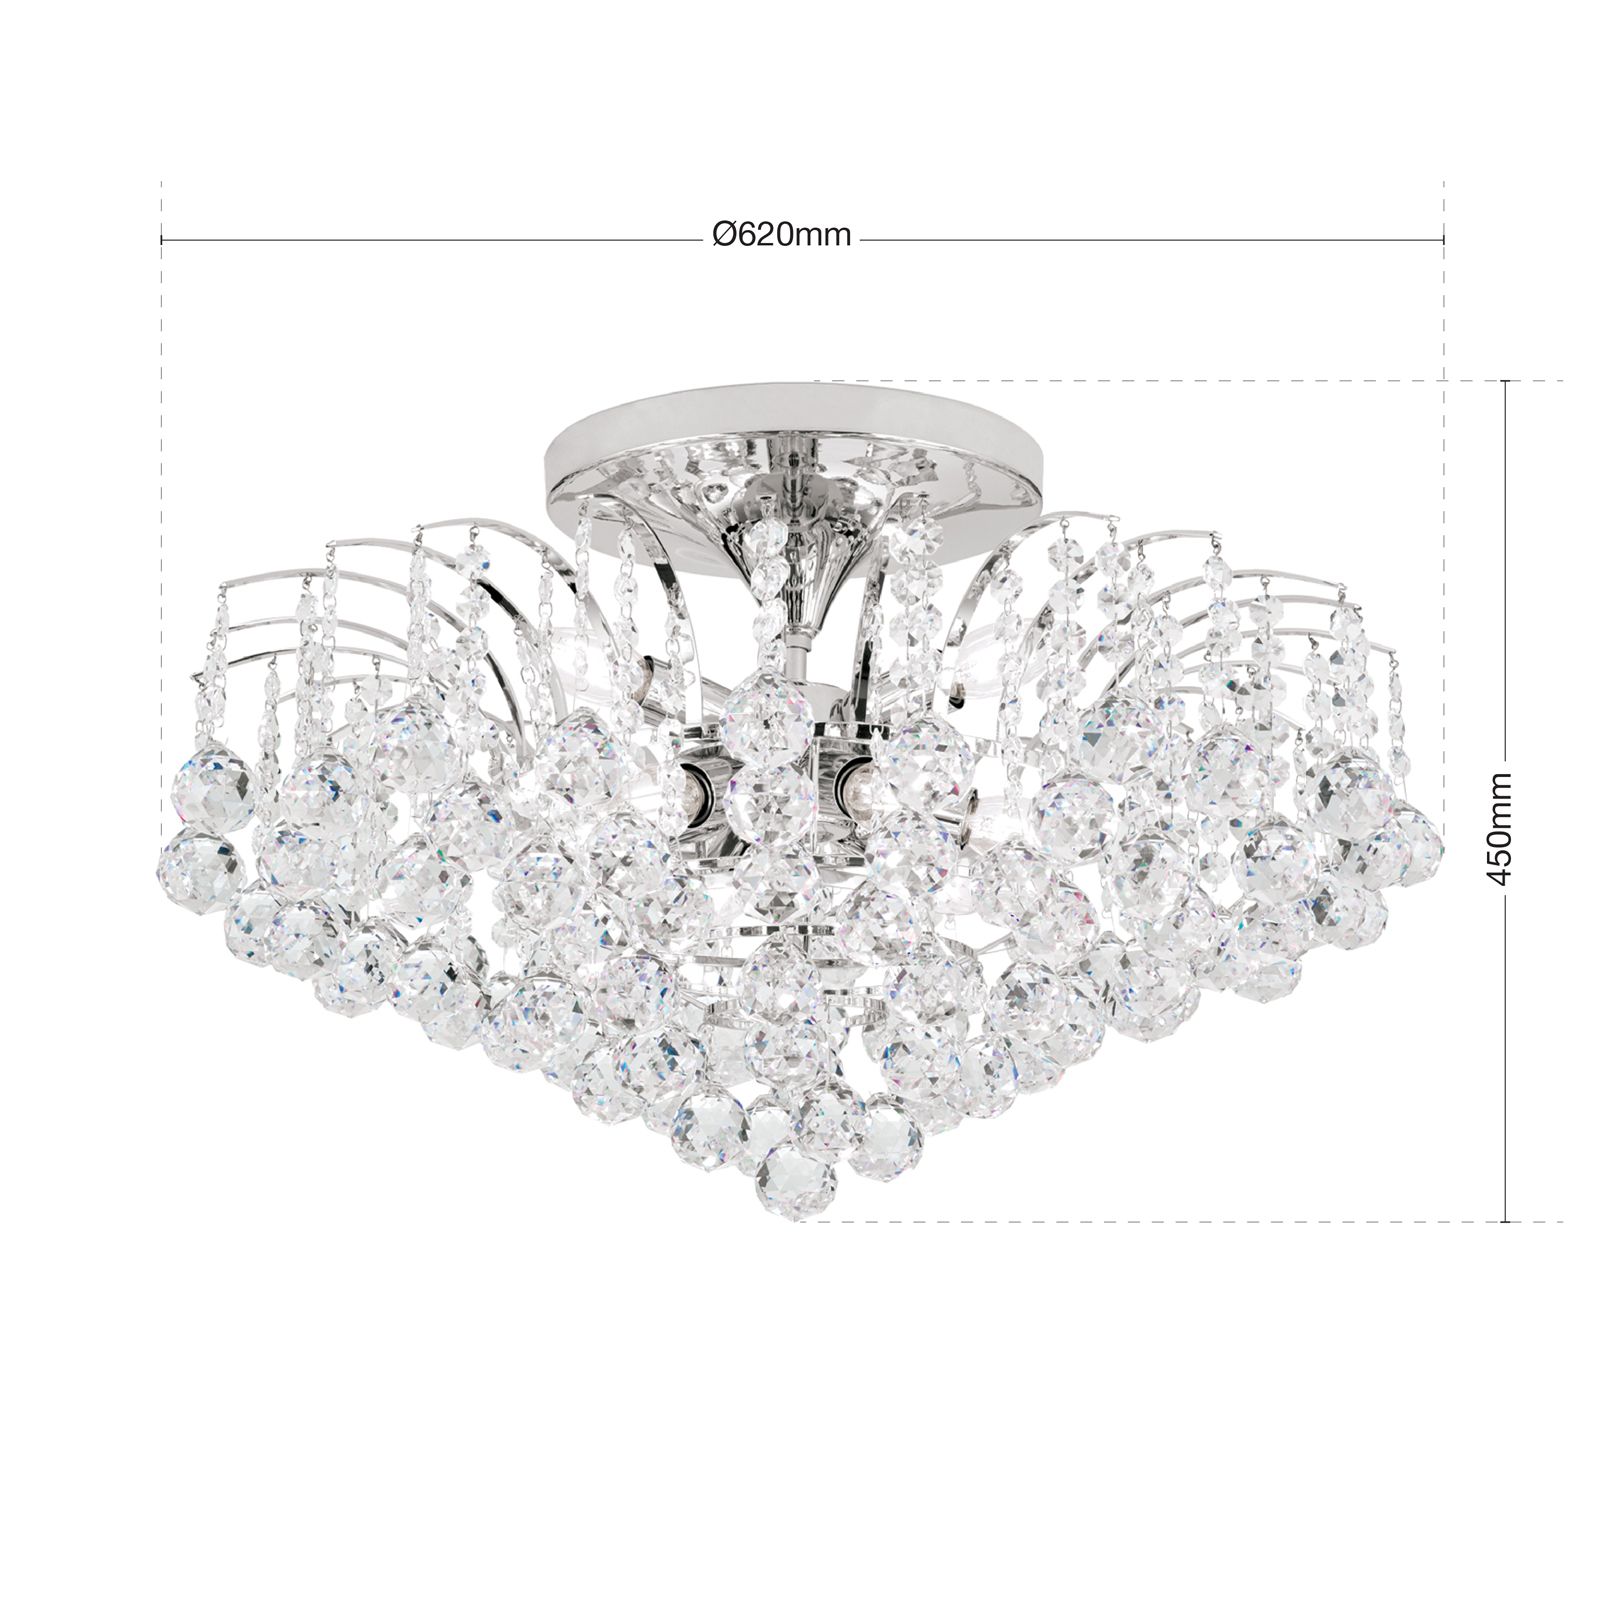 KRISTALL chrome KLASSISCH crystal ceiling light, plated, 9 lamps, clear